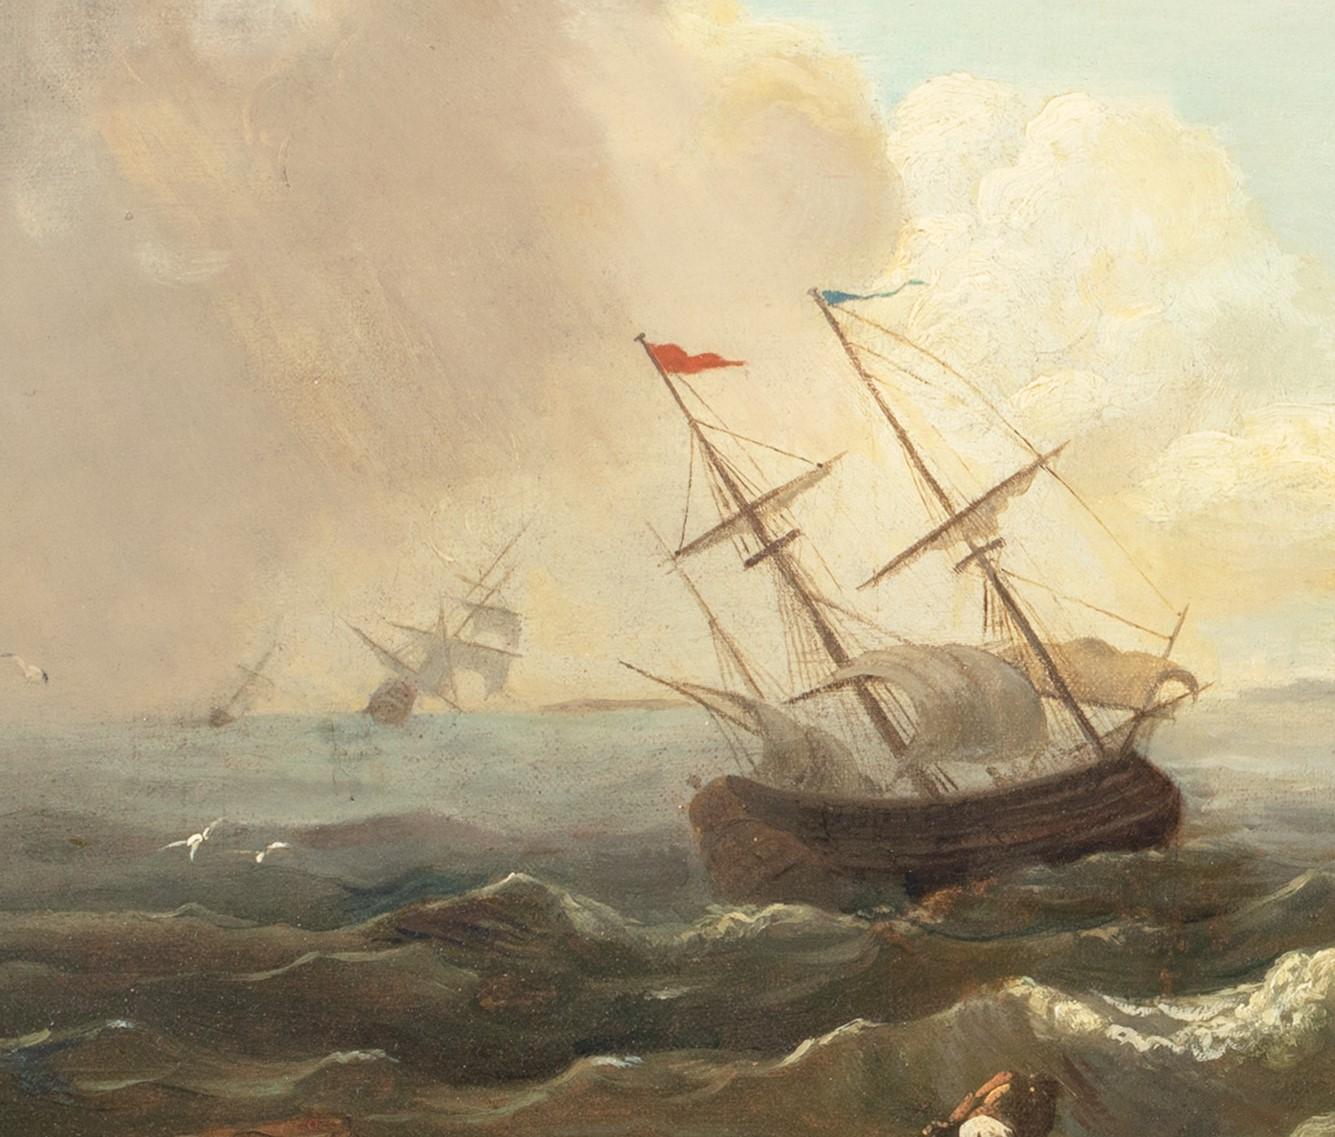 Rocky Coastal Scene, 18th Century 

attributed to Joseph VERNET (1714-1789)

18th century French coastal scene of a ship in rough waters off a rocky coast, oil on canvas attributed to Joseph Vernet. Good quality and condition panoramic coastal scene